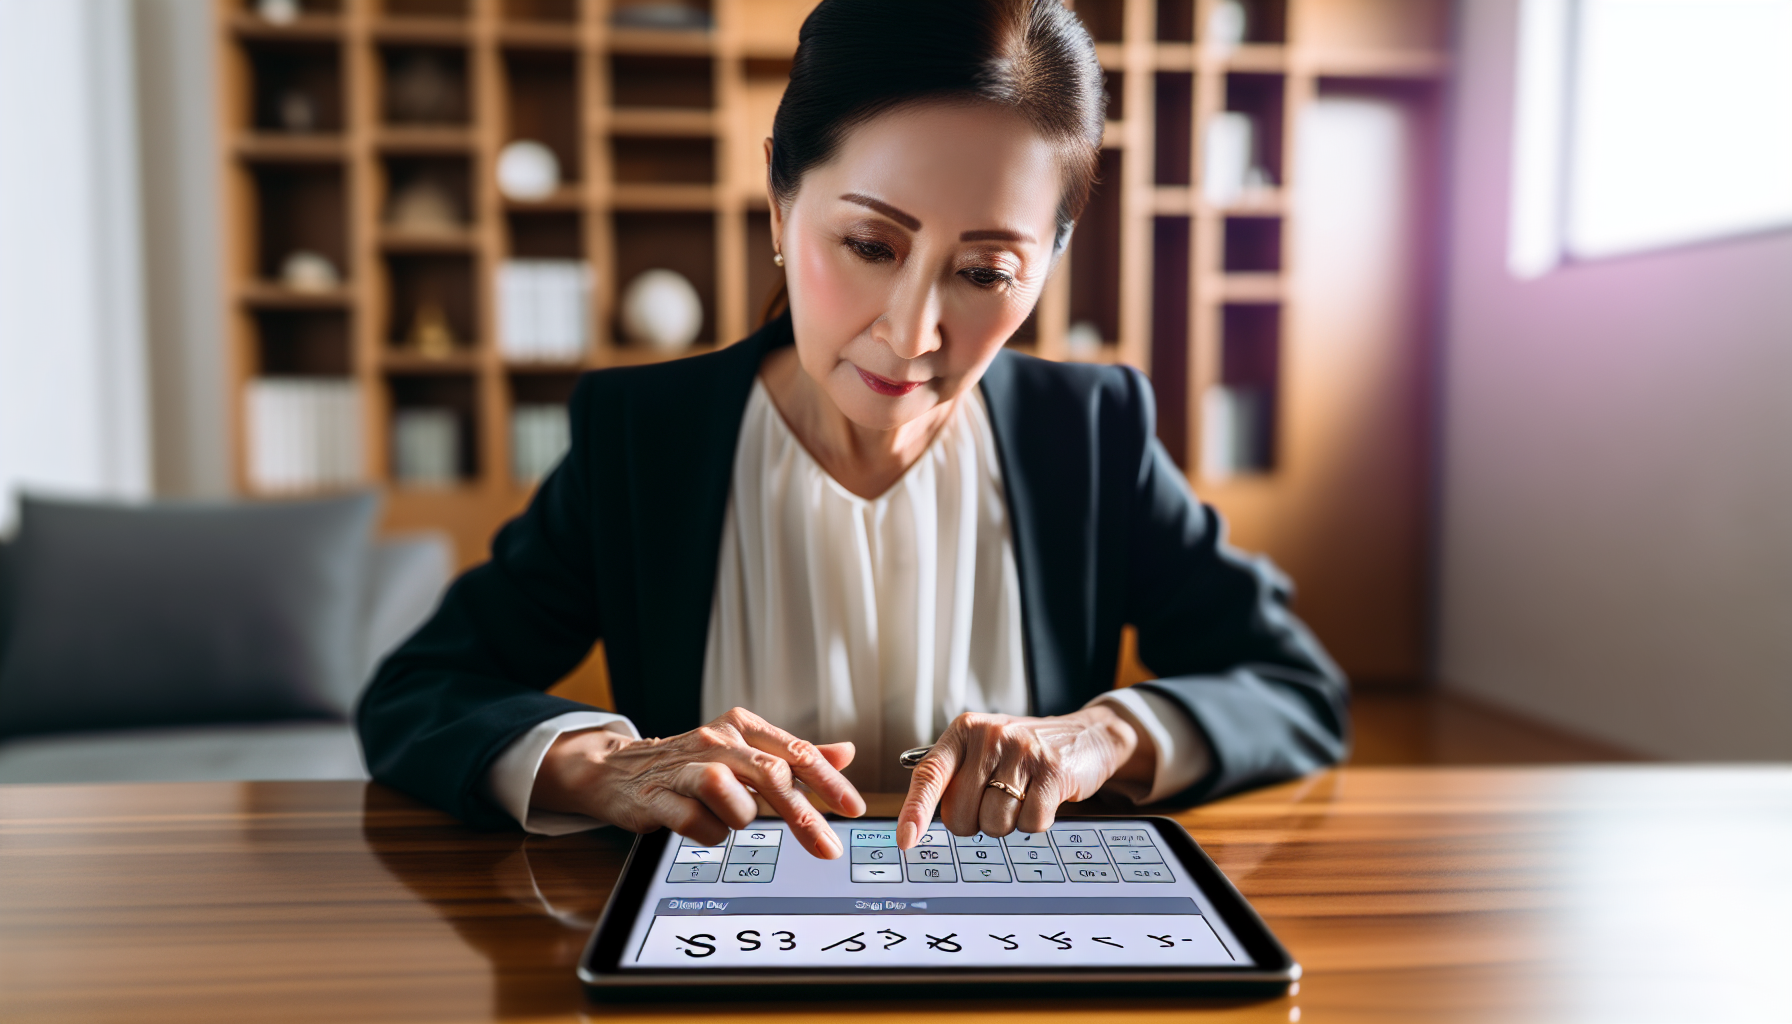 Photo of a person using a stamp duty calculator on a digital tablet